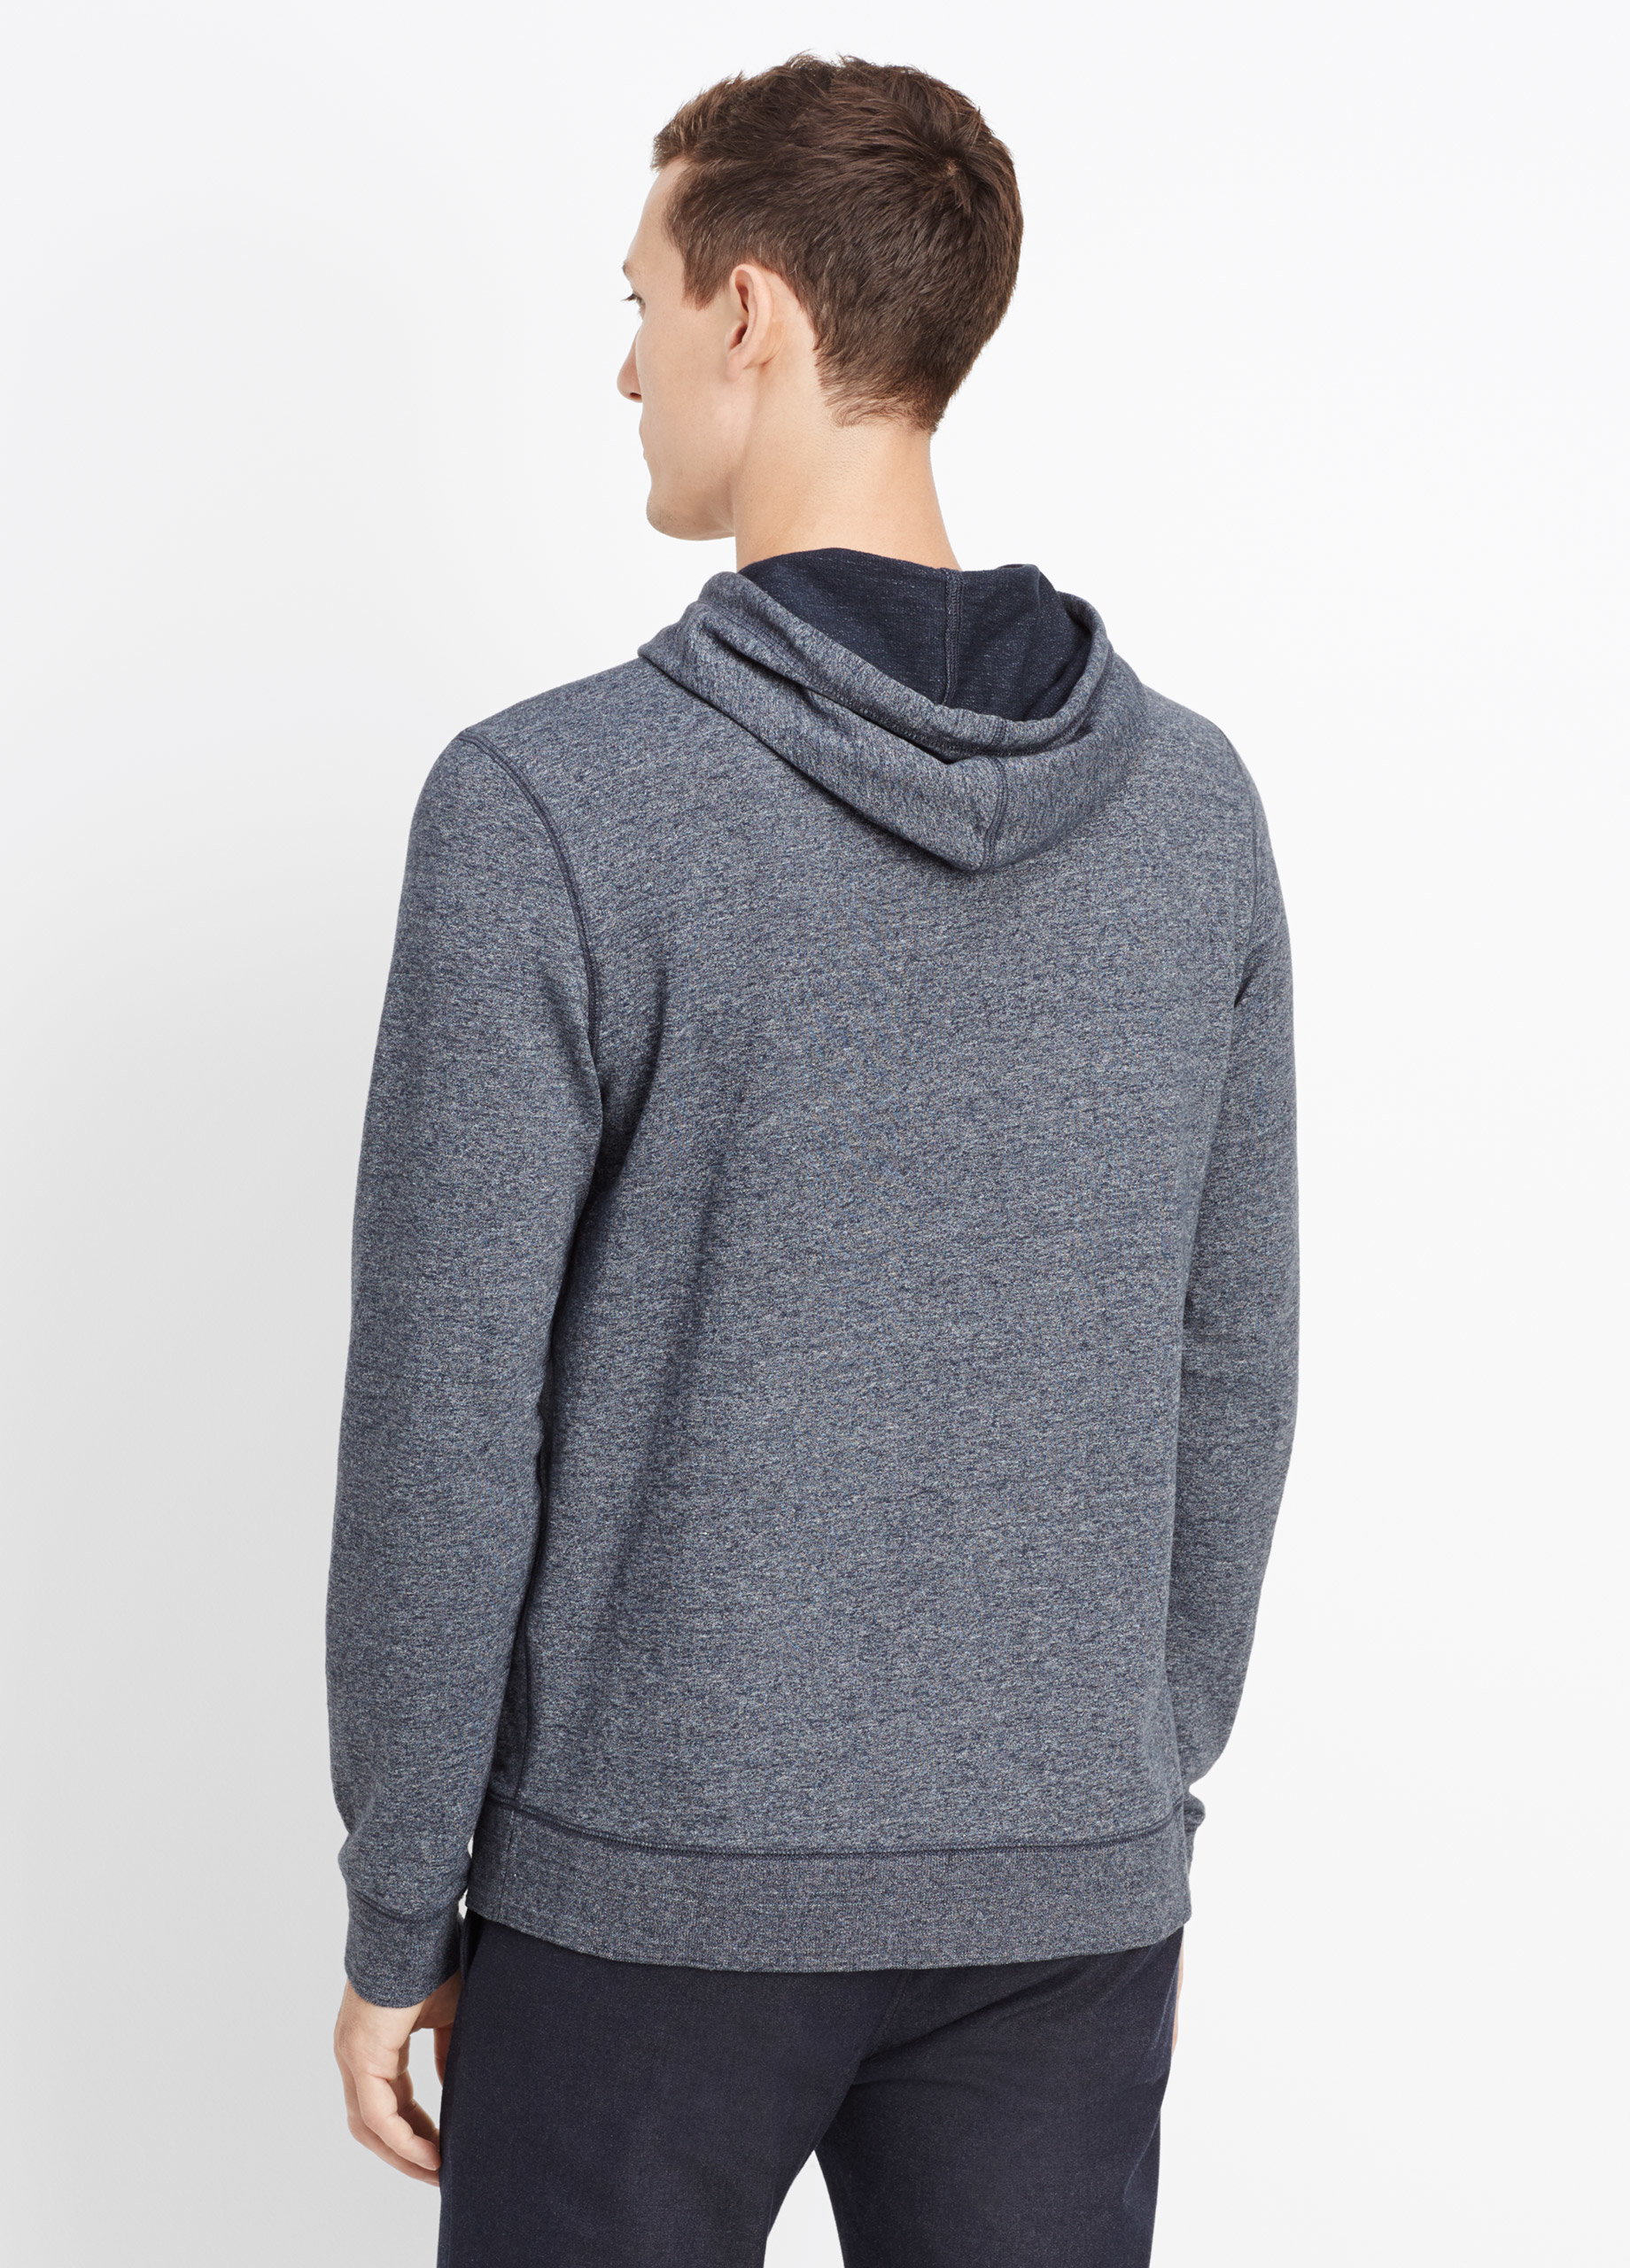 Vince French Terry Pullover Hoodie in Blue for Men - Lyst